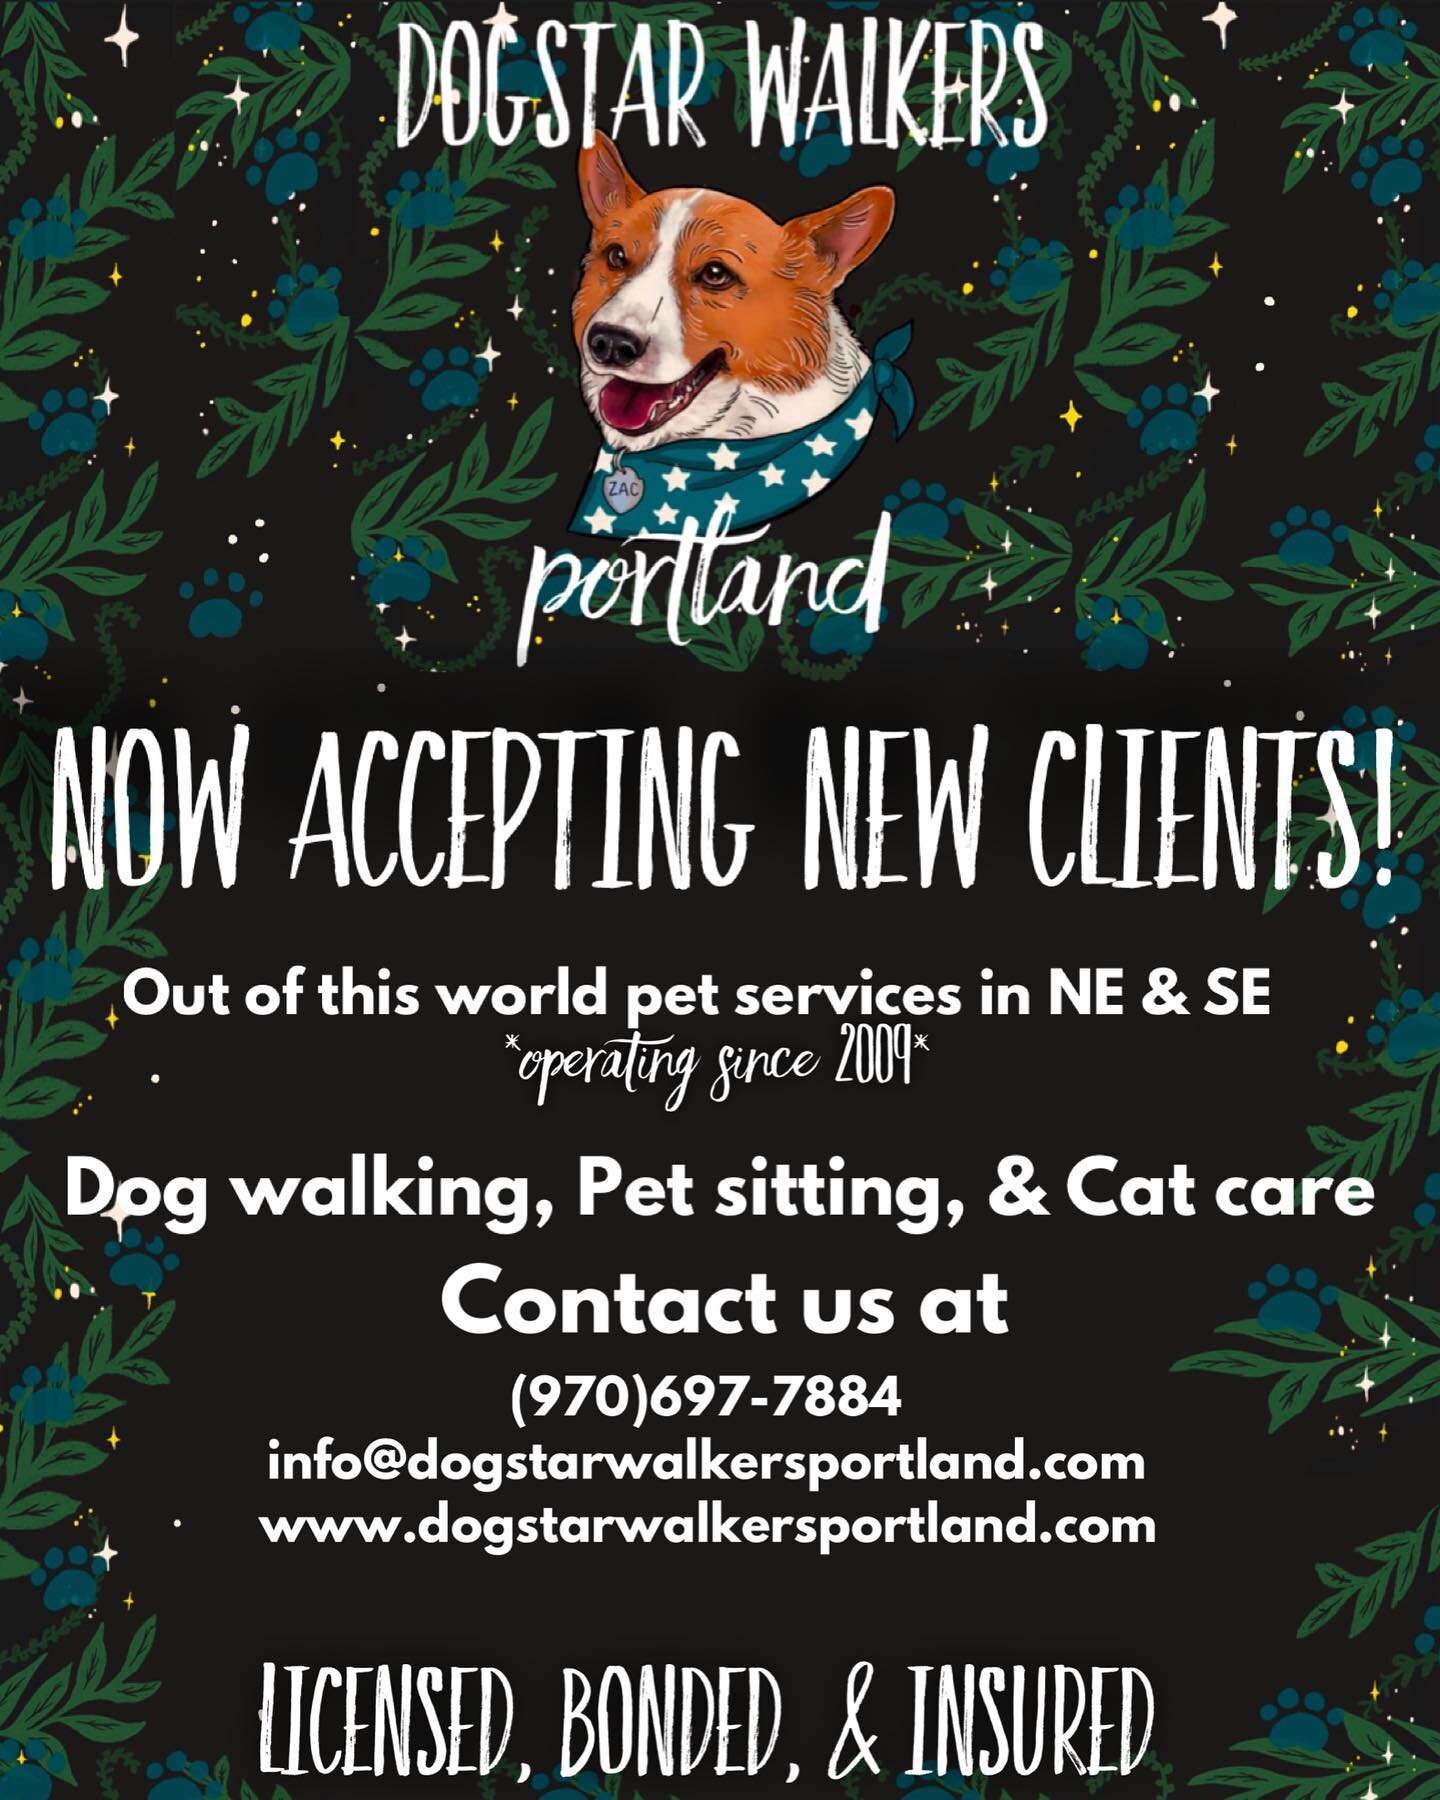 Tell all your friends!! ❤️ servicing NE and SE Portland 
.
.
.
#portlandoregon #portland #pdx #portlandpets #portlandpetsitter #portlanddogsitter #portlanddogwalkers #portlanddogs #portlanddog #portlanddogwalker #portlanddogadventures #portlanddoglov